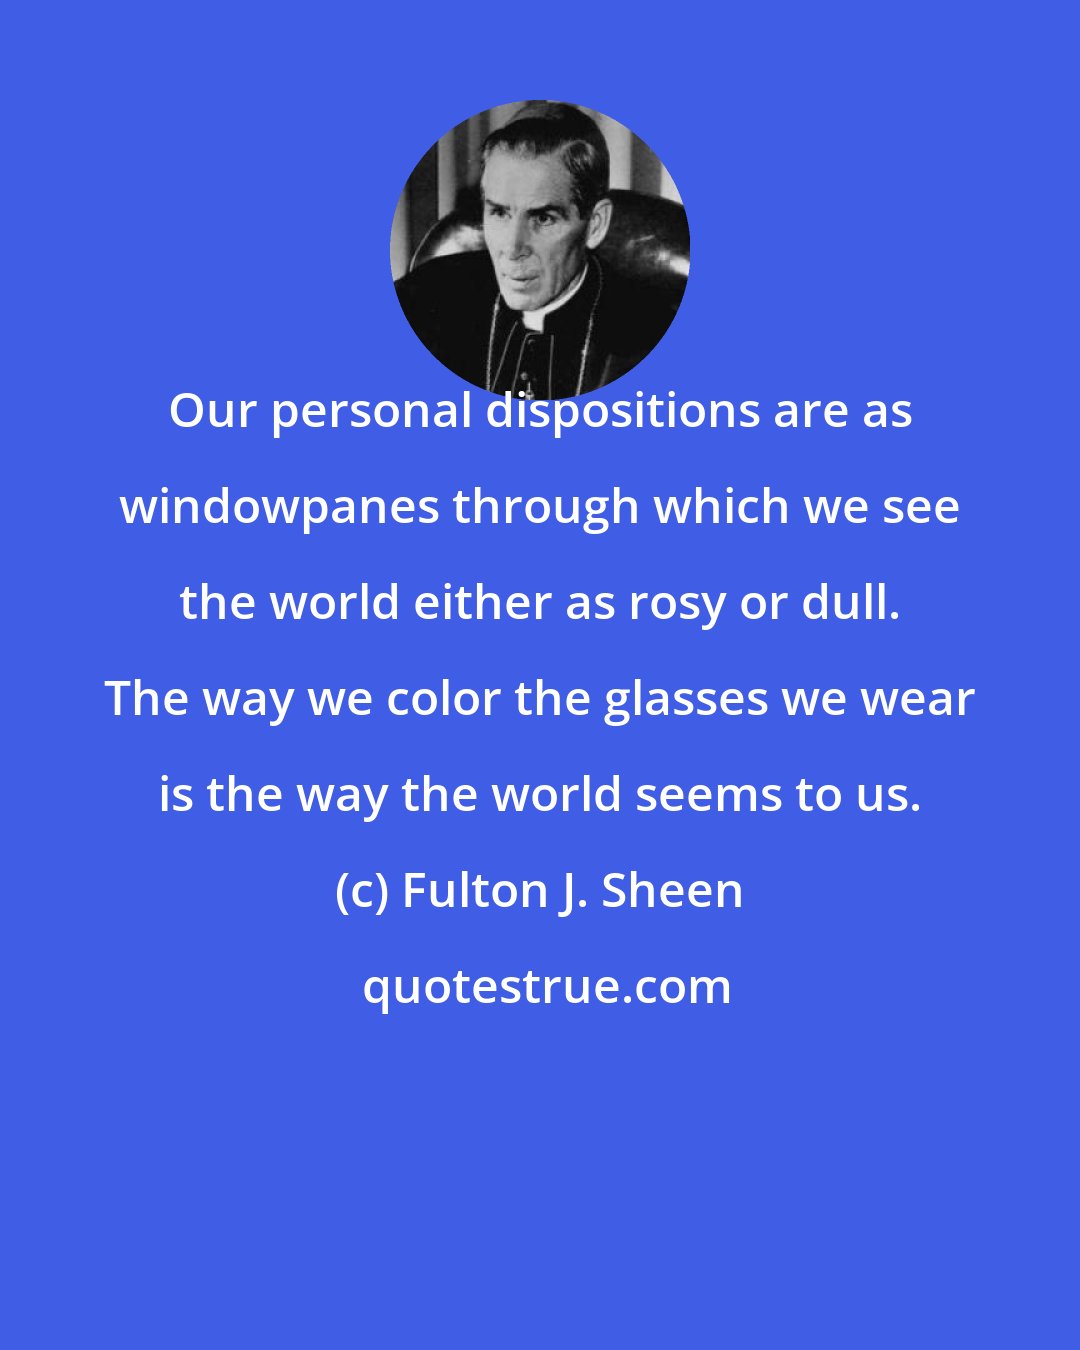 Fulton J. Sheen: Our personal dispositions are as windowpanes through which we see the world either as rosy or dull. The way we color the glasses we wear is the way the world seems to us.